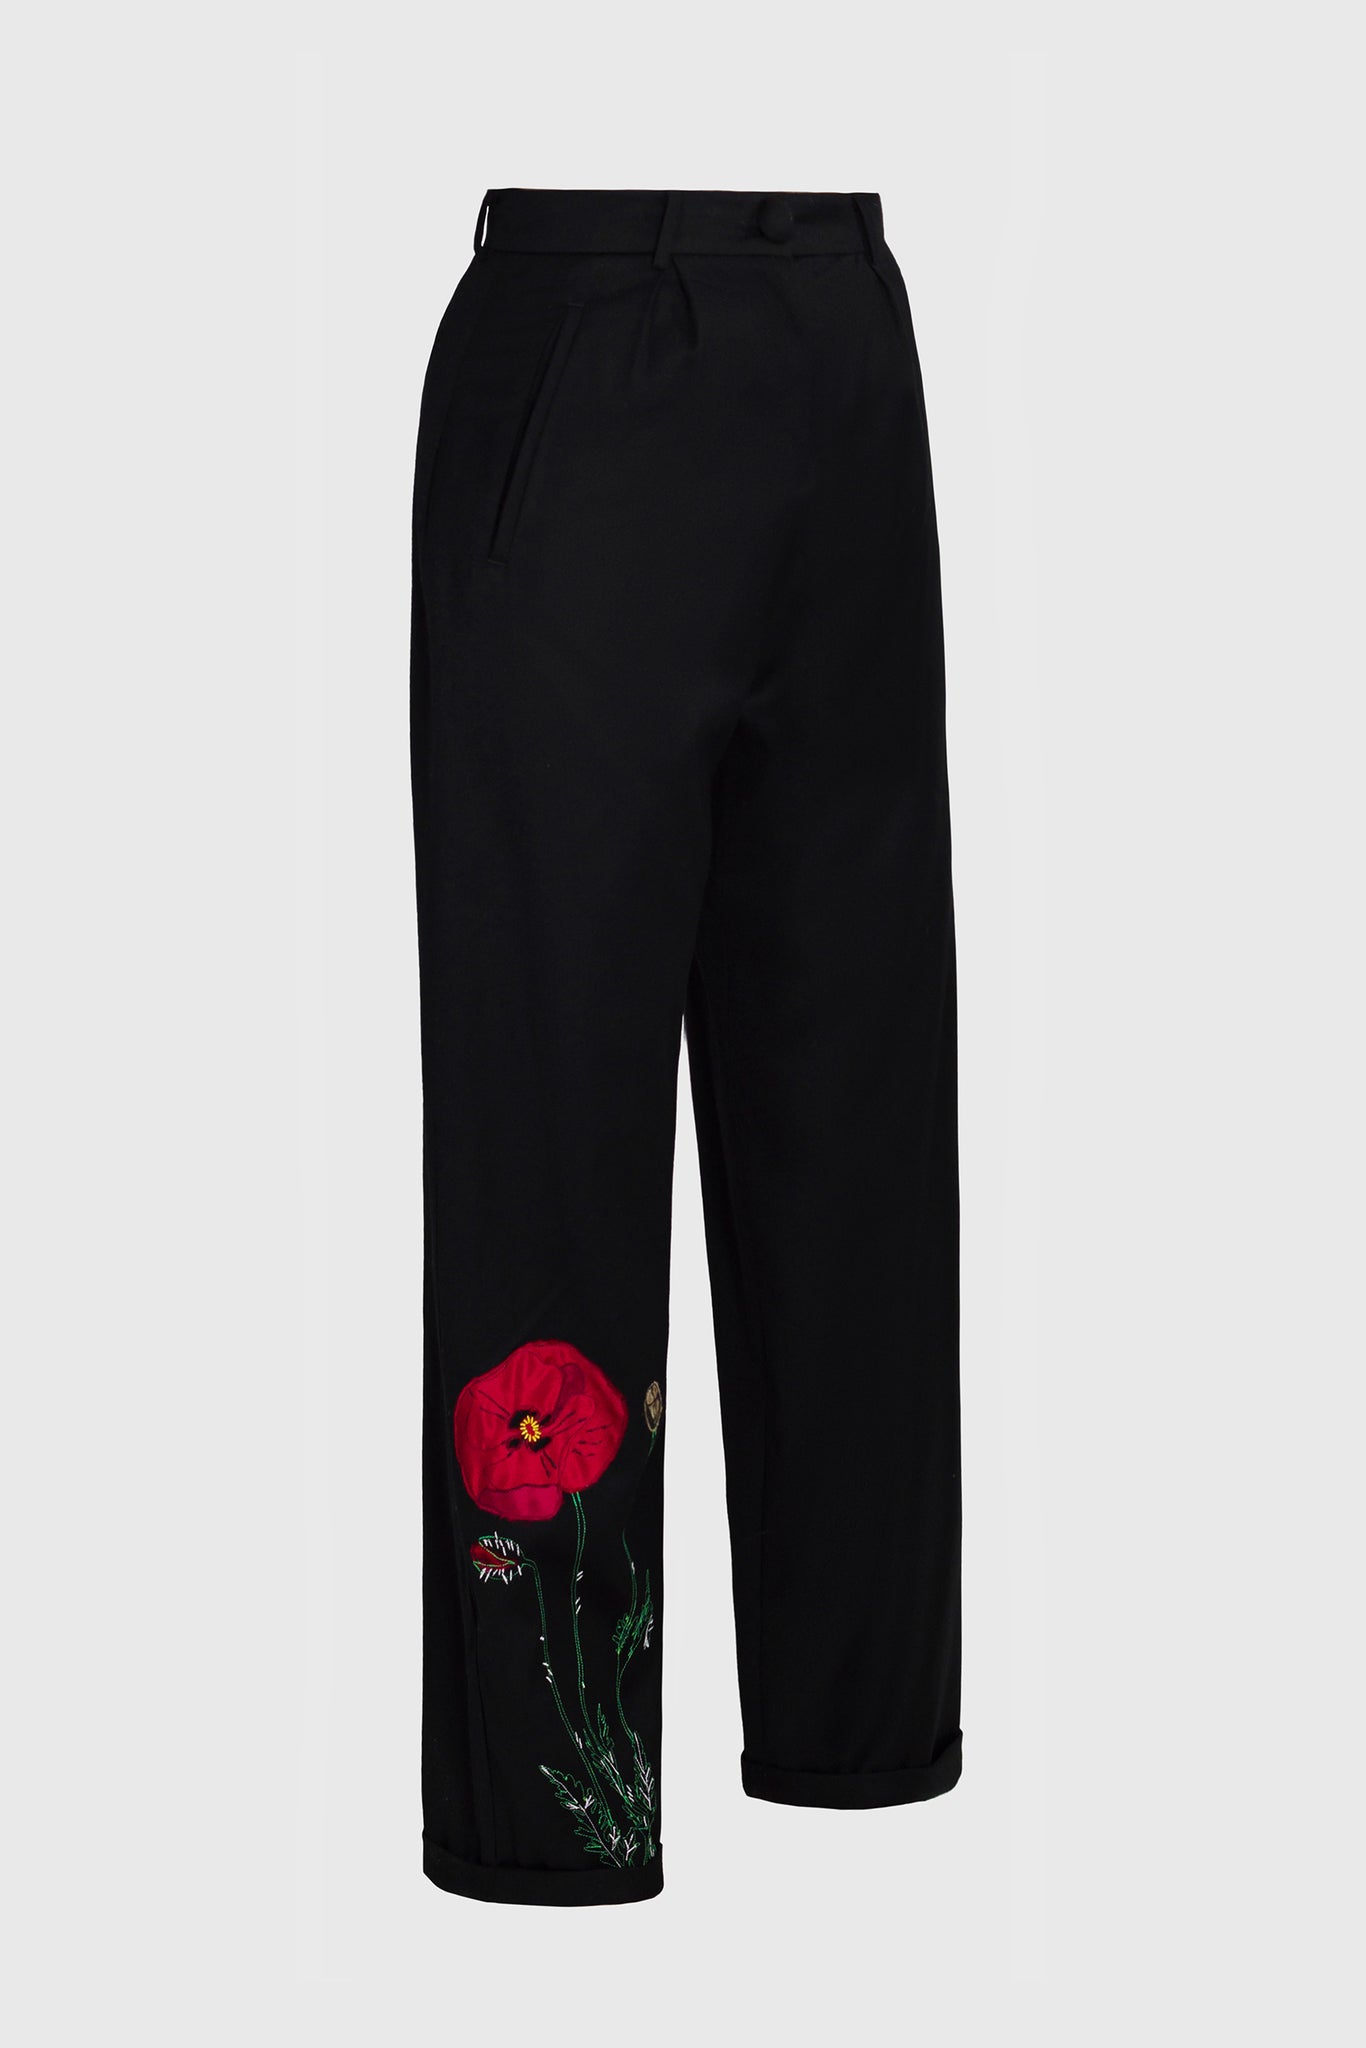 stylish straight long trousers, crafted in soft deep black wool, luxurious feeling, for knowledgeable women of tailored fashion, office and business attire, business women fashion, for nature lovers, hints of nature, poppy flower embroidery on right leg